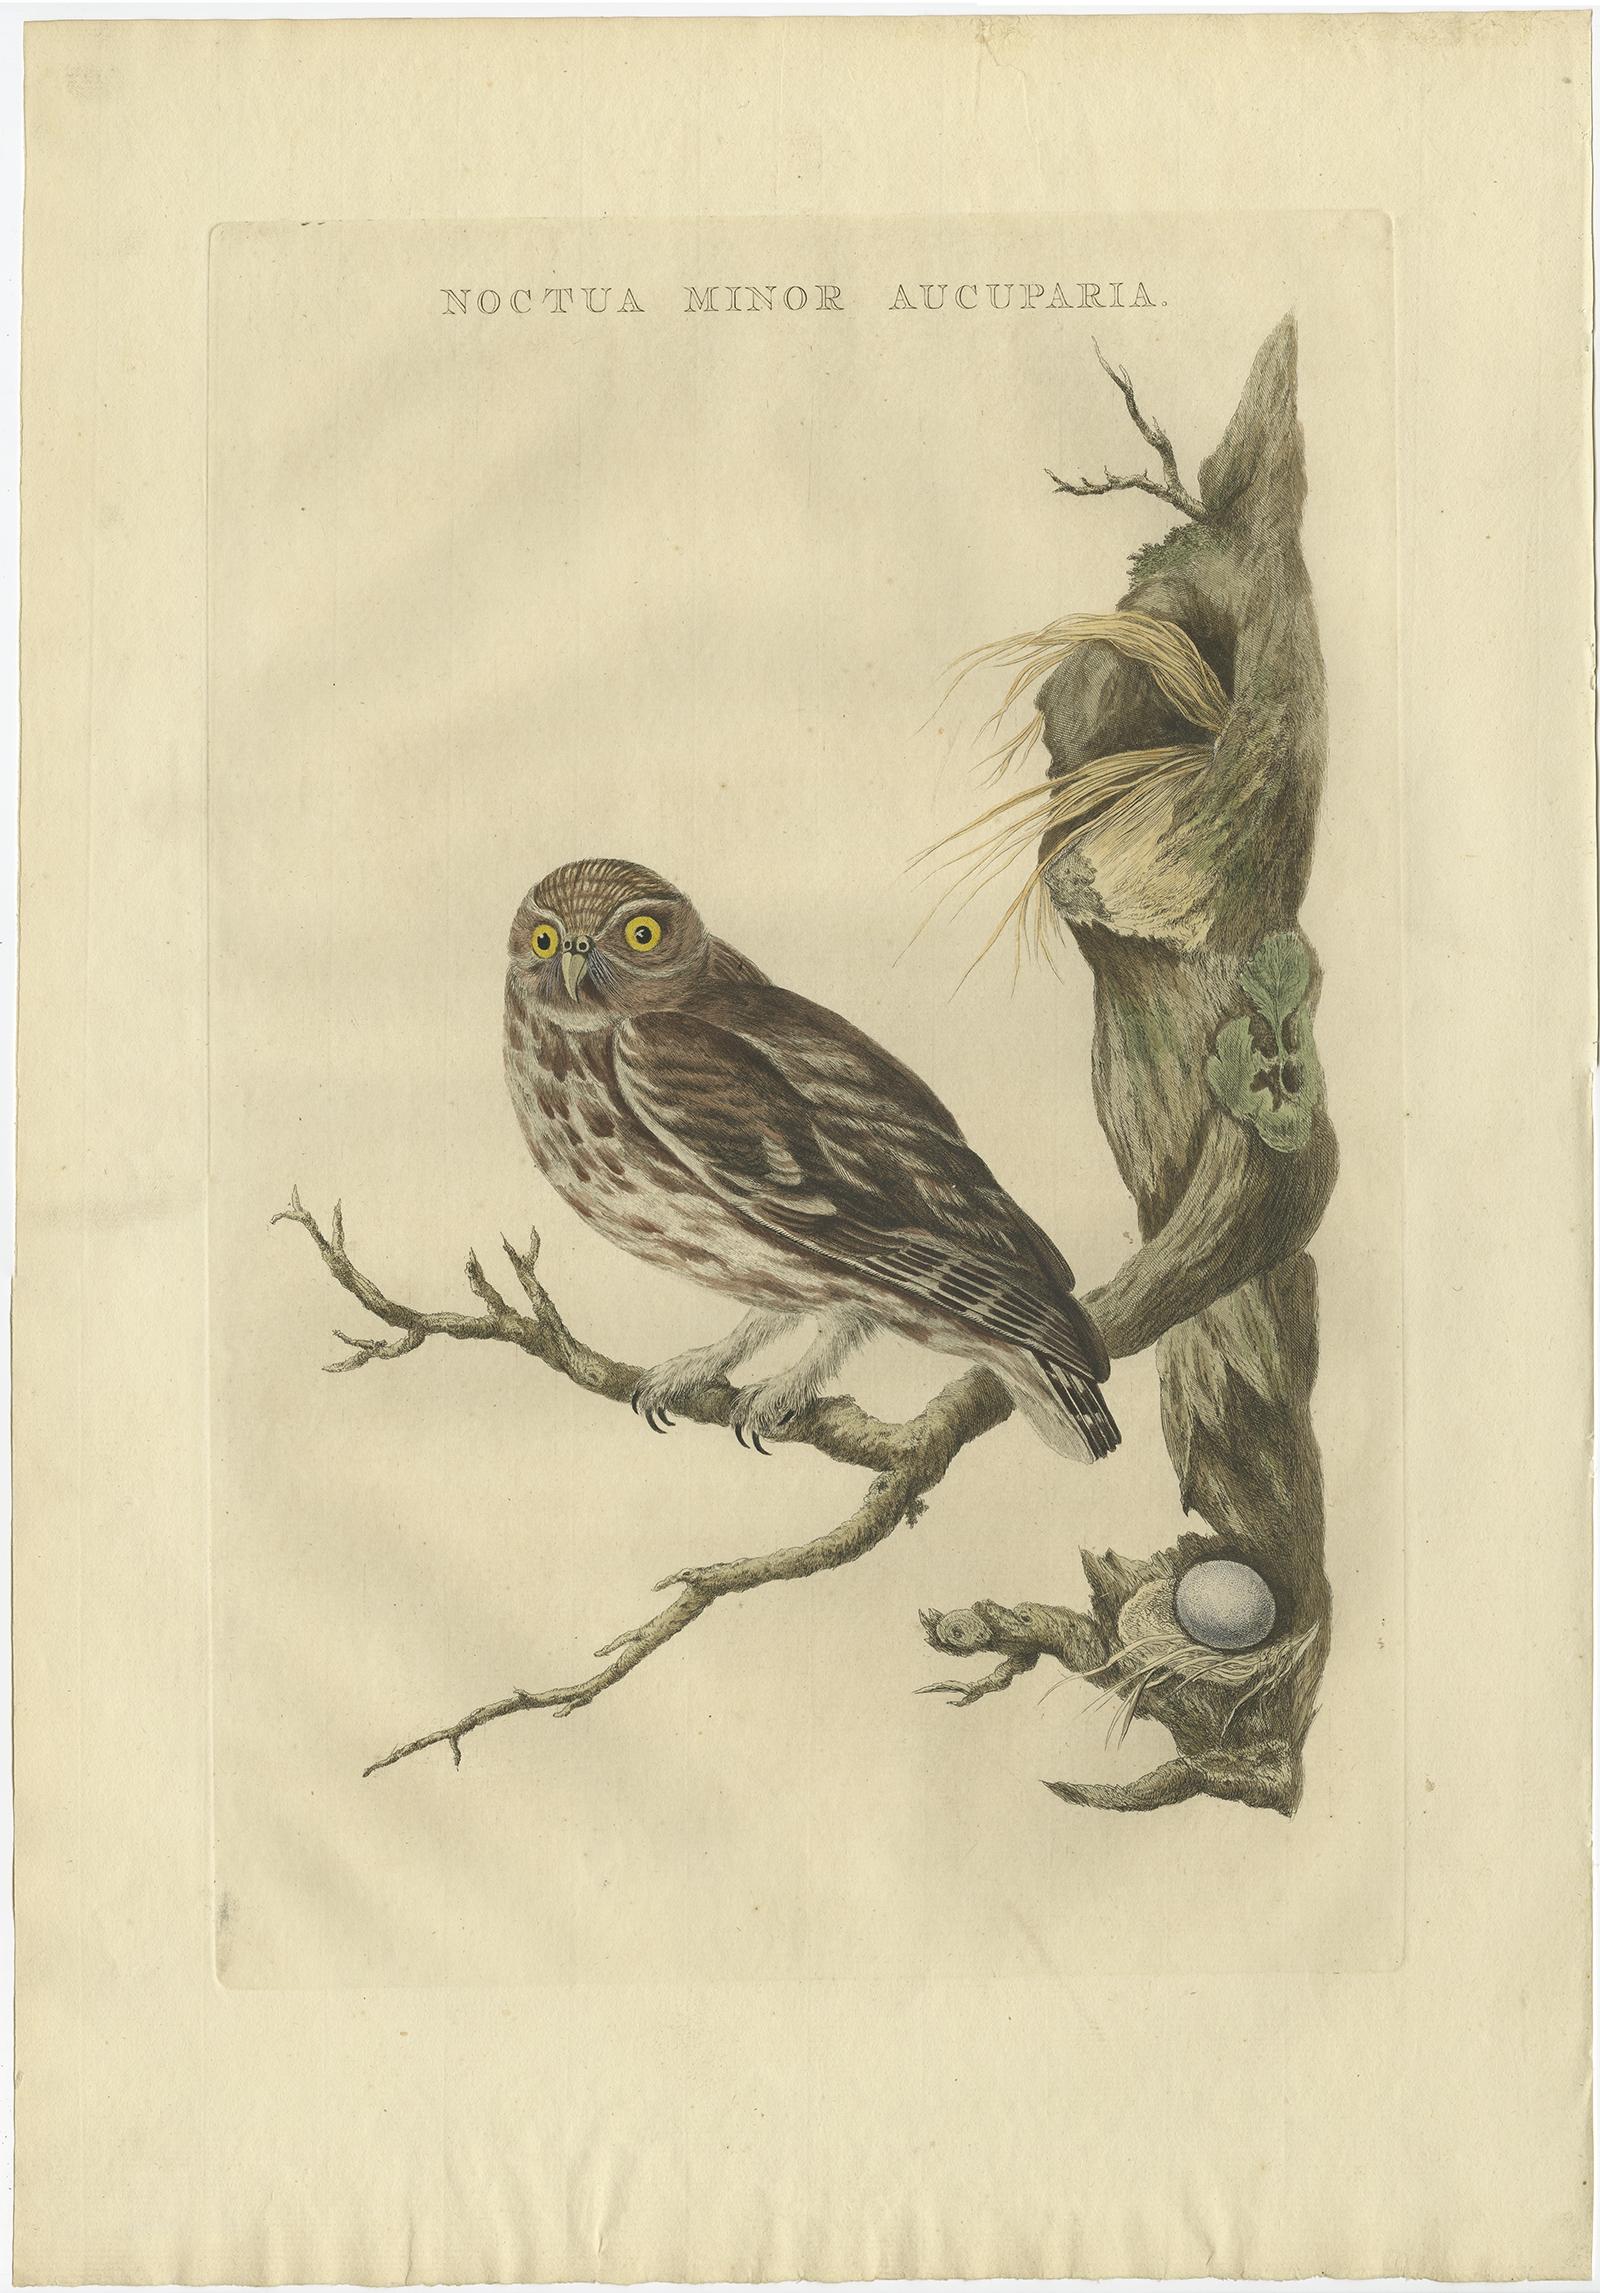 Antique print titled 'Noctua Minor Aucuparia'. 

This print depicts the little owl (Dutch: steenuil). The little owl (Athene noctua) is a bird that inhabits much of the temperate and warmer parts of Europe, Asia east to Korea, and north Africa. It